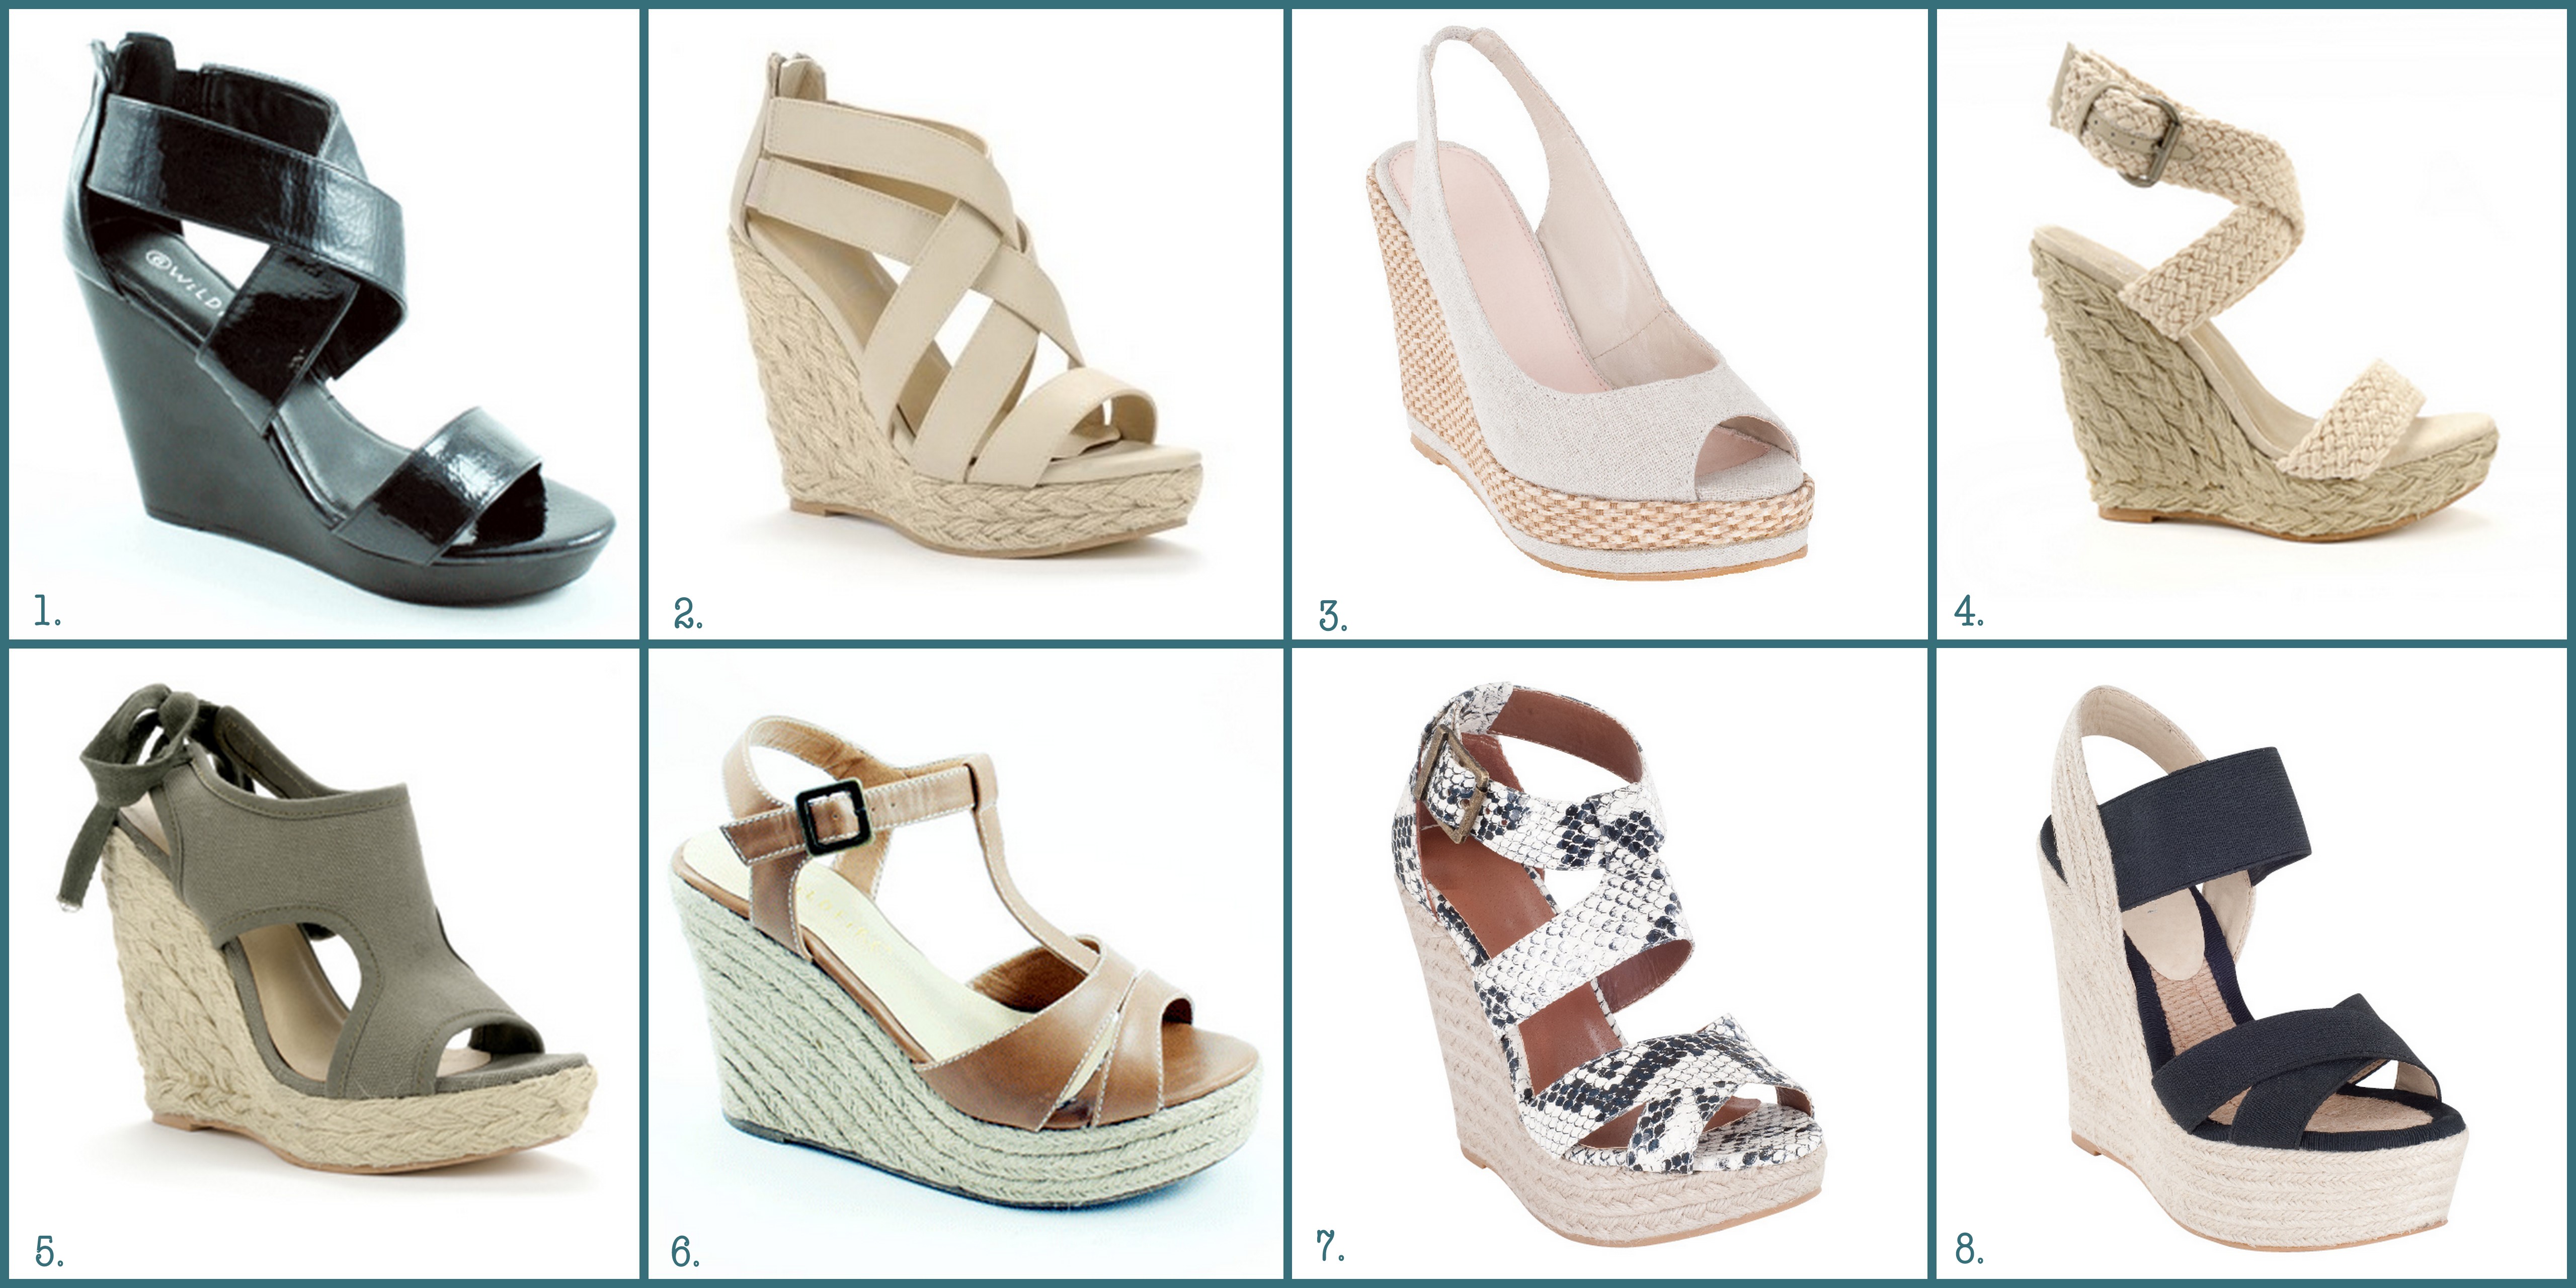 spendless shoes wedges